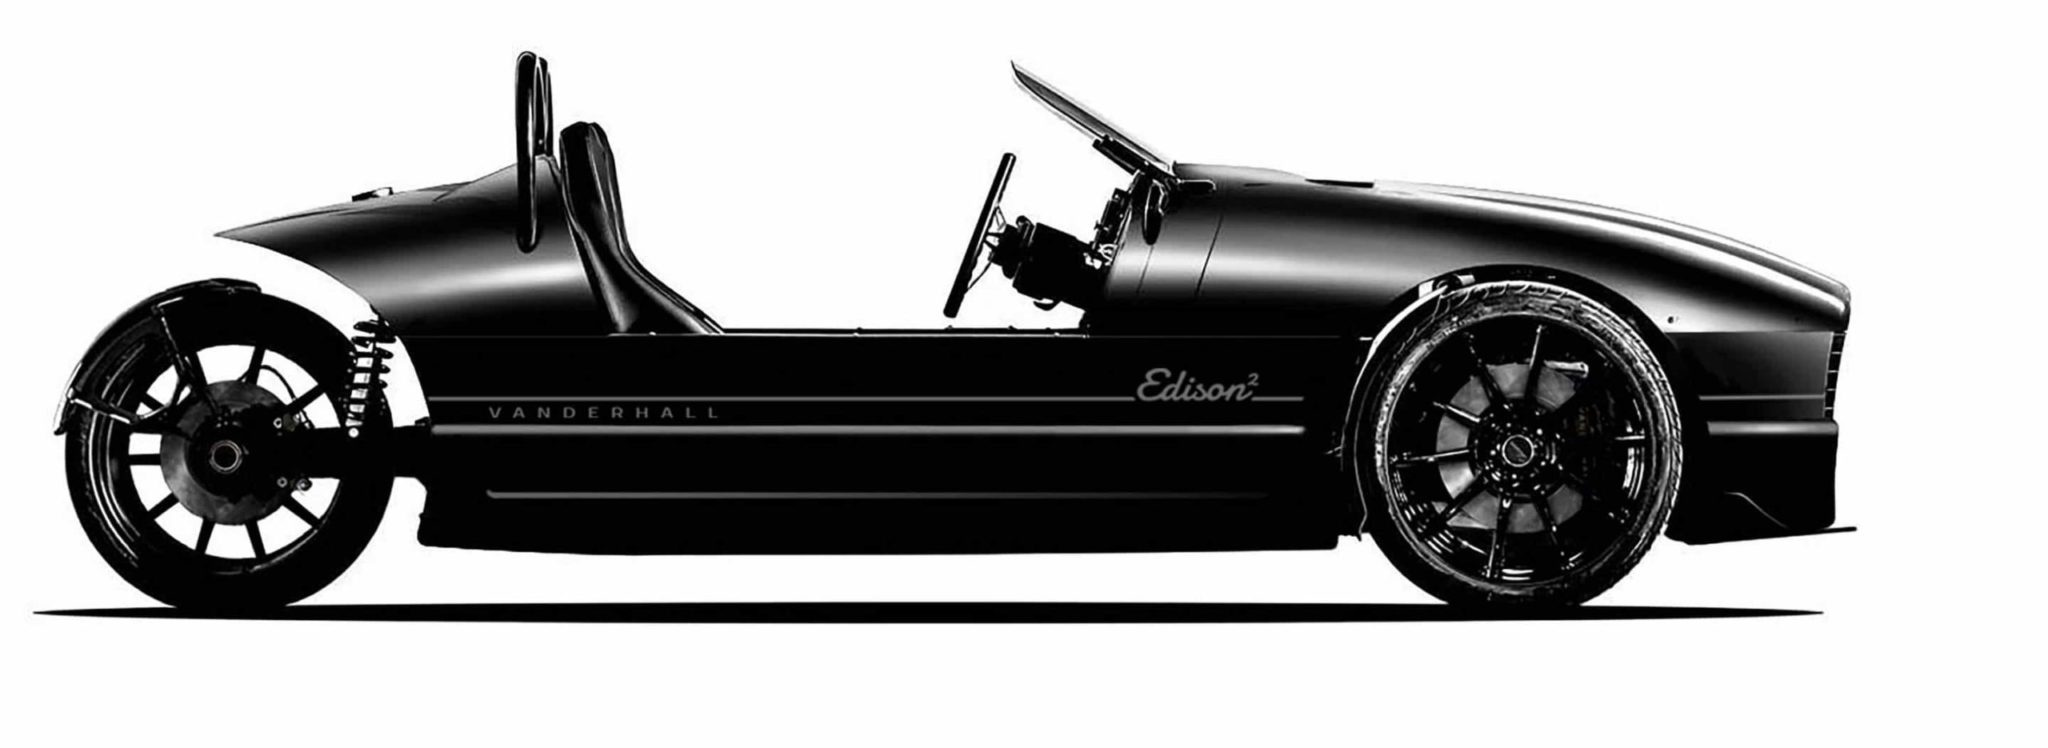 vanderhall-side-view-models-Edison-2_2020-scaled